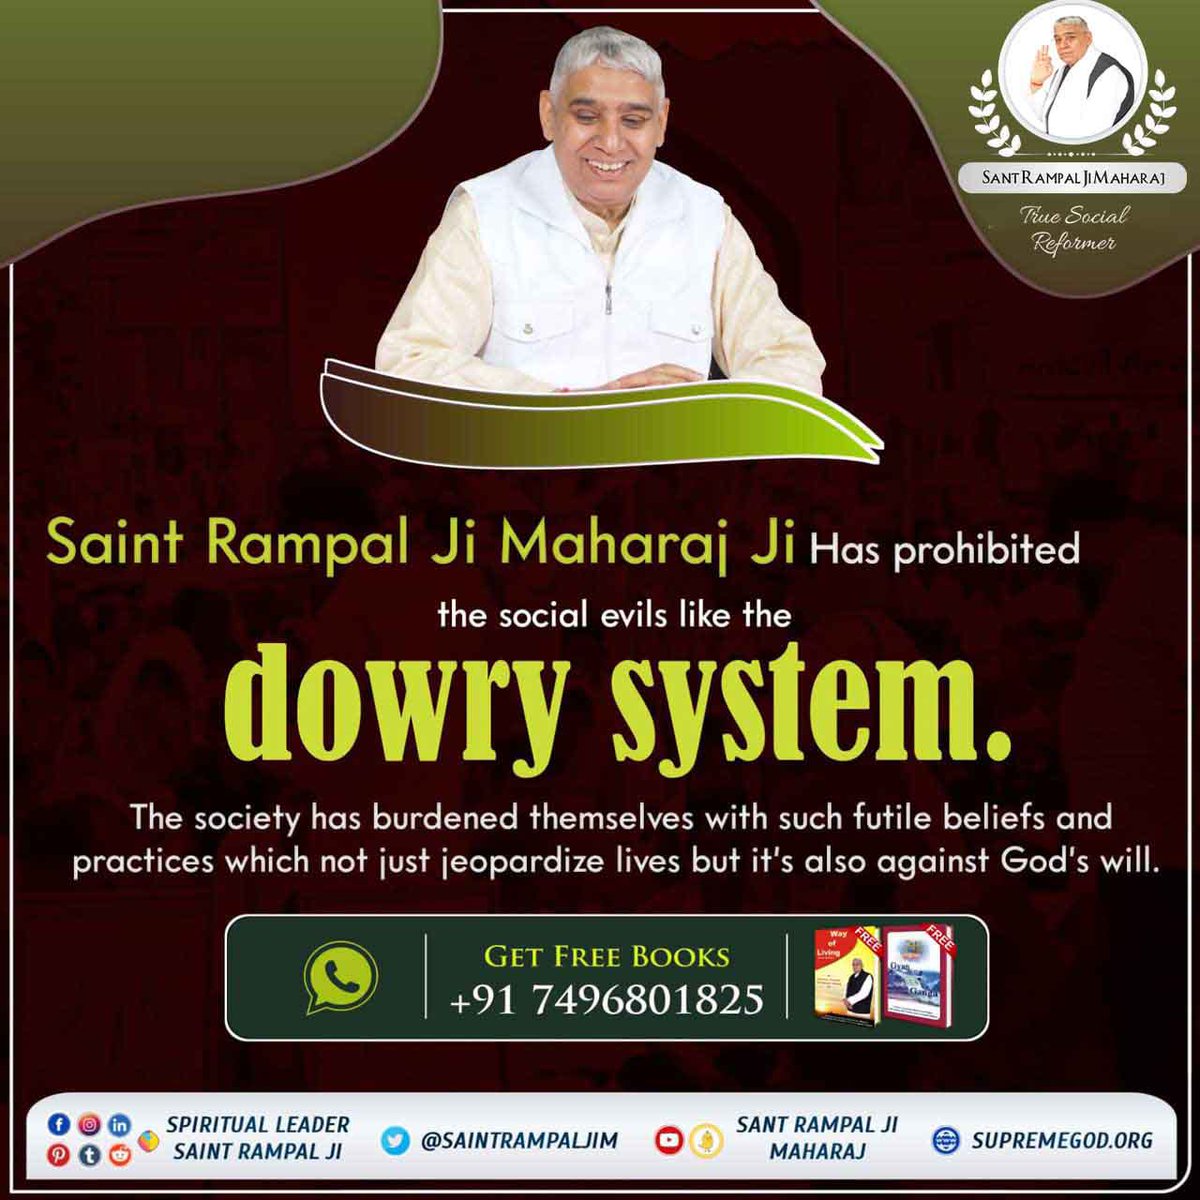 Saint Rampal Ji Maharaj Ji
Has prohibited
the social evils like the 
dowry system.
The society has burdened themselves with such futile beliefs and
practices which not just jeopardize lives but it's also against God's will.
#GodNightFriday

#Sant_Rampalji_Maharaj_App